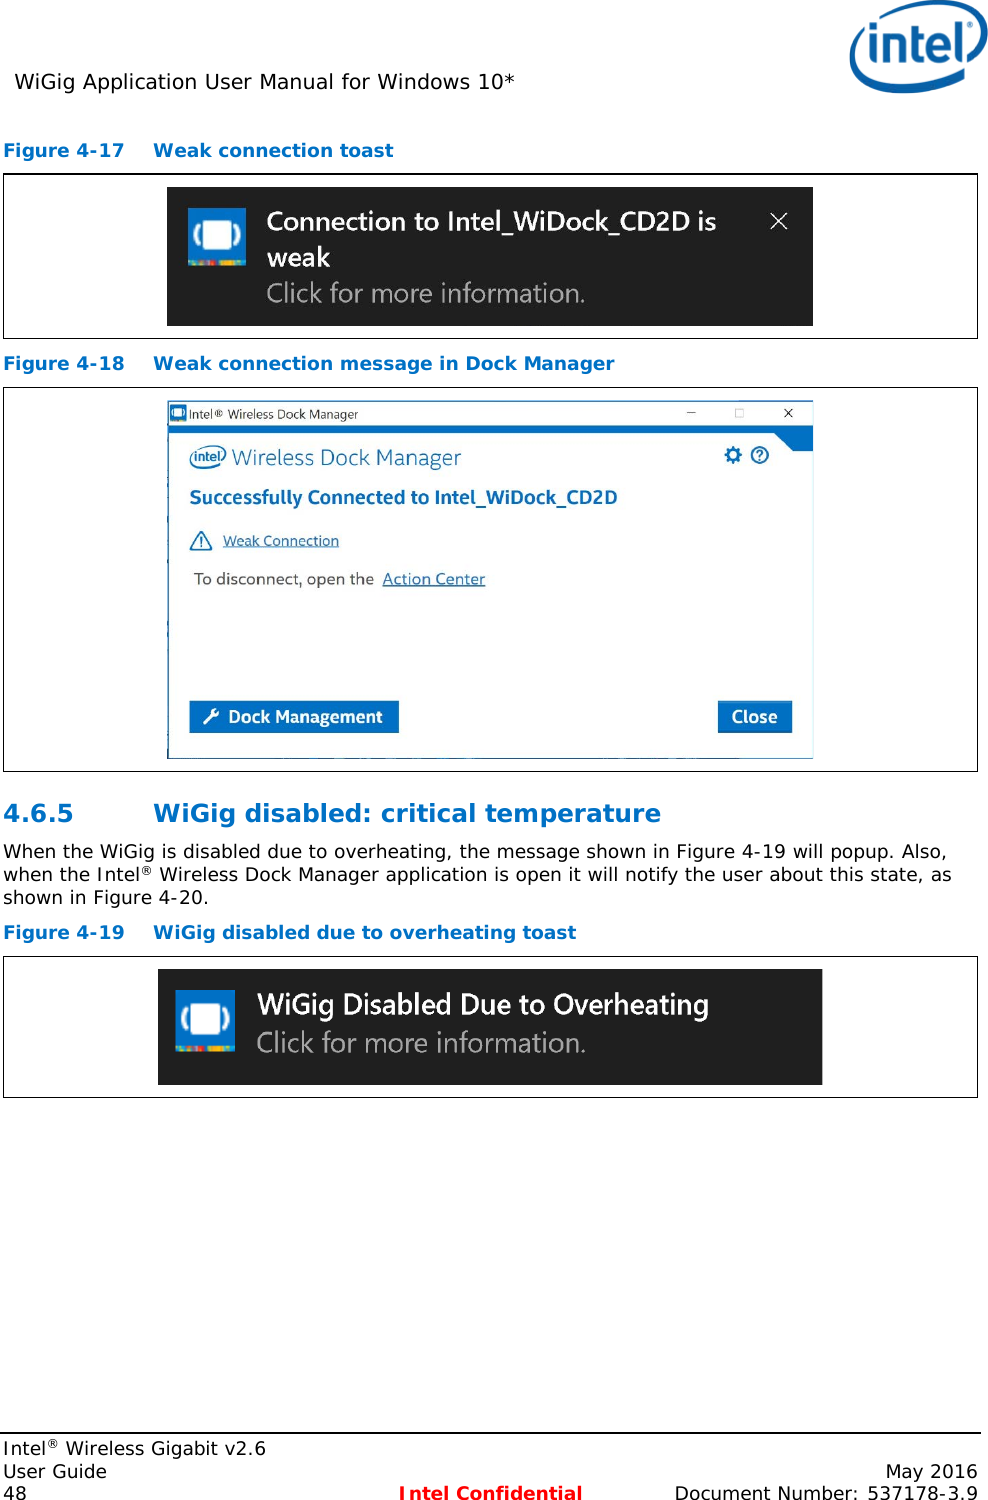 WiGig Application User Manual for Windows 10*    Intel® Wireless Gigabit v2.6 User Guide    May 2016 48 Intel Confidential Document Number: 537178-3.9 Figure 4-17 Weak connection toast  Figure 4-18 Weak connection message in Dock Manager  4.6.5 WiGig disabled: critical temperature When the WiGig is disabled due to overheating, the message shown in Figure 4-19 will popup. Also, when the Intel® Wireless Dock Manager application is open it will notify the user about this state, as shown in Figure 4-20. Figure 4-19 WiGig disabled due to overheating toast  